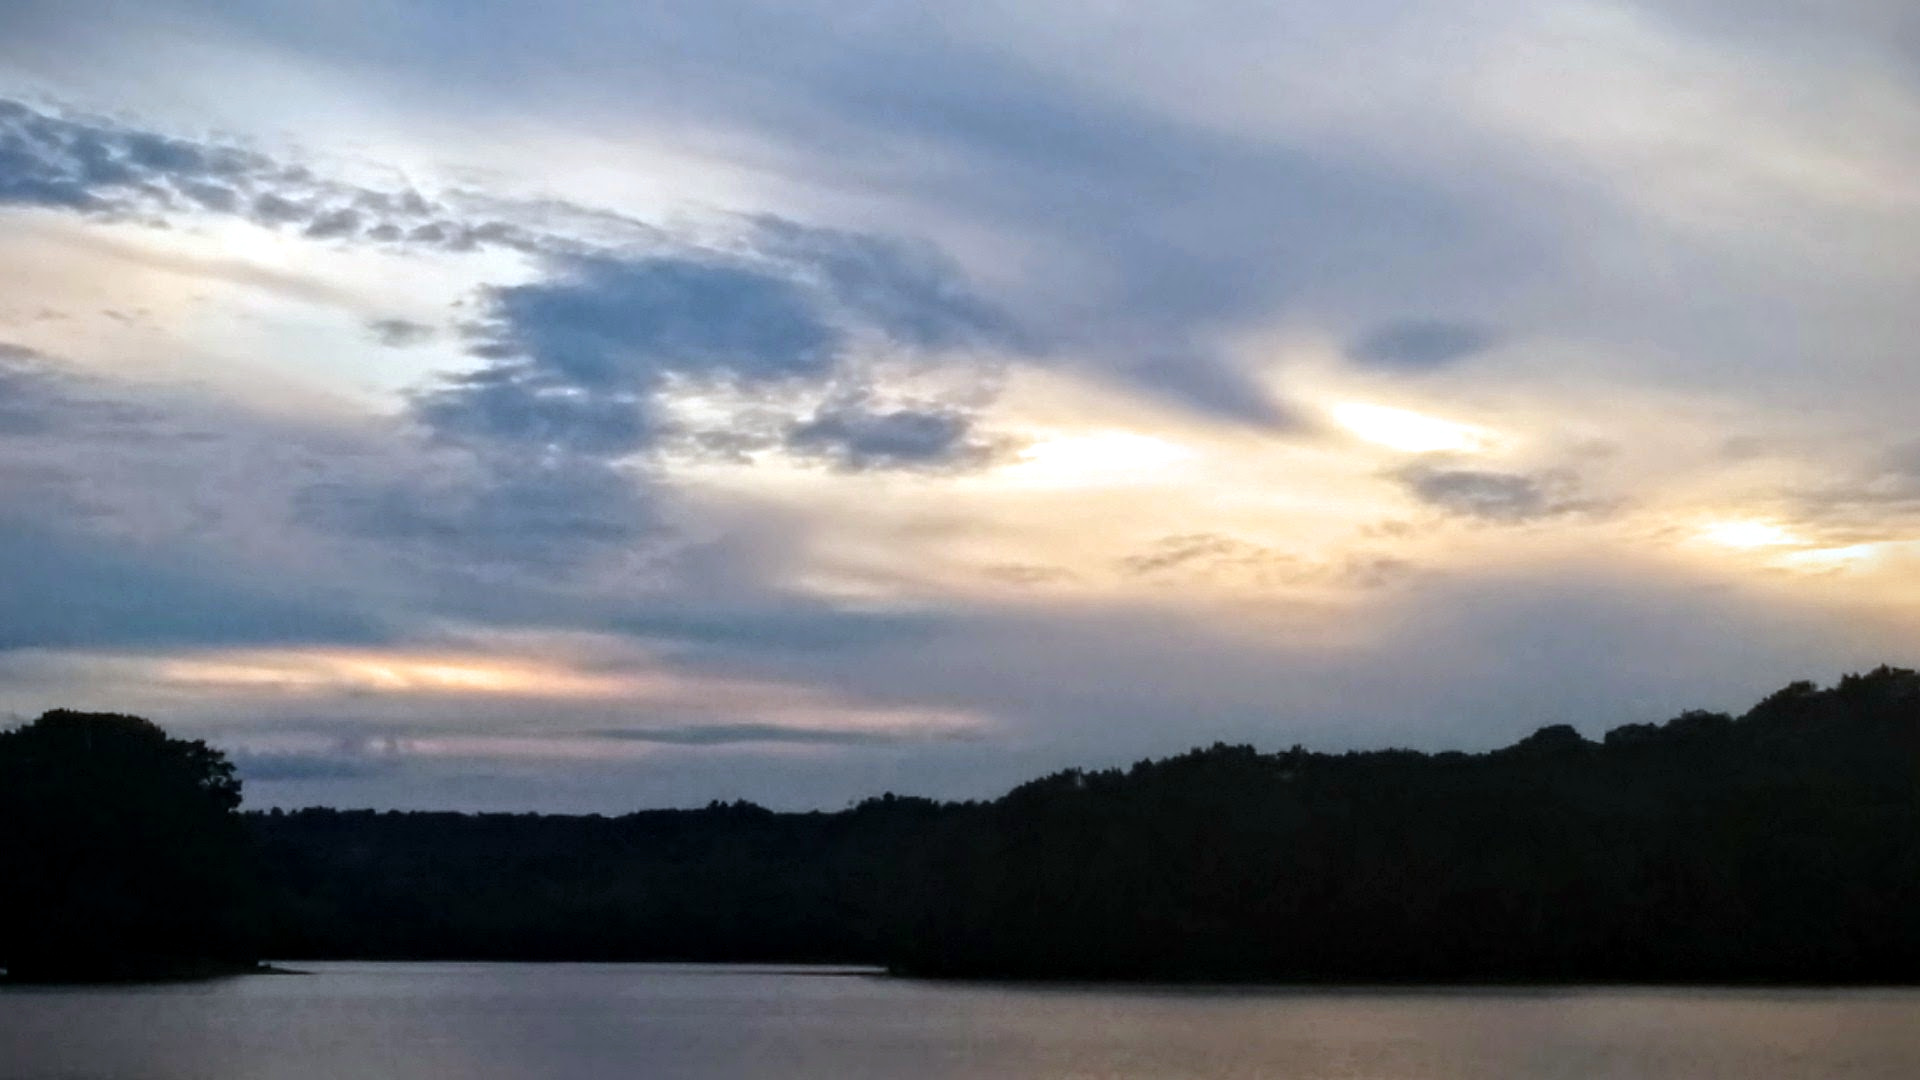 Wide-angle waterscape at dusk of Spy Pond, in Arlington, Massachusetts, USA. The crepuscular sky occupies most of the width and height of the photo, with thin white and dark clouds. Across the bottom is the water and the silhouetted opposite bank of the pond.